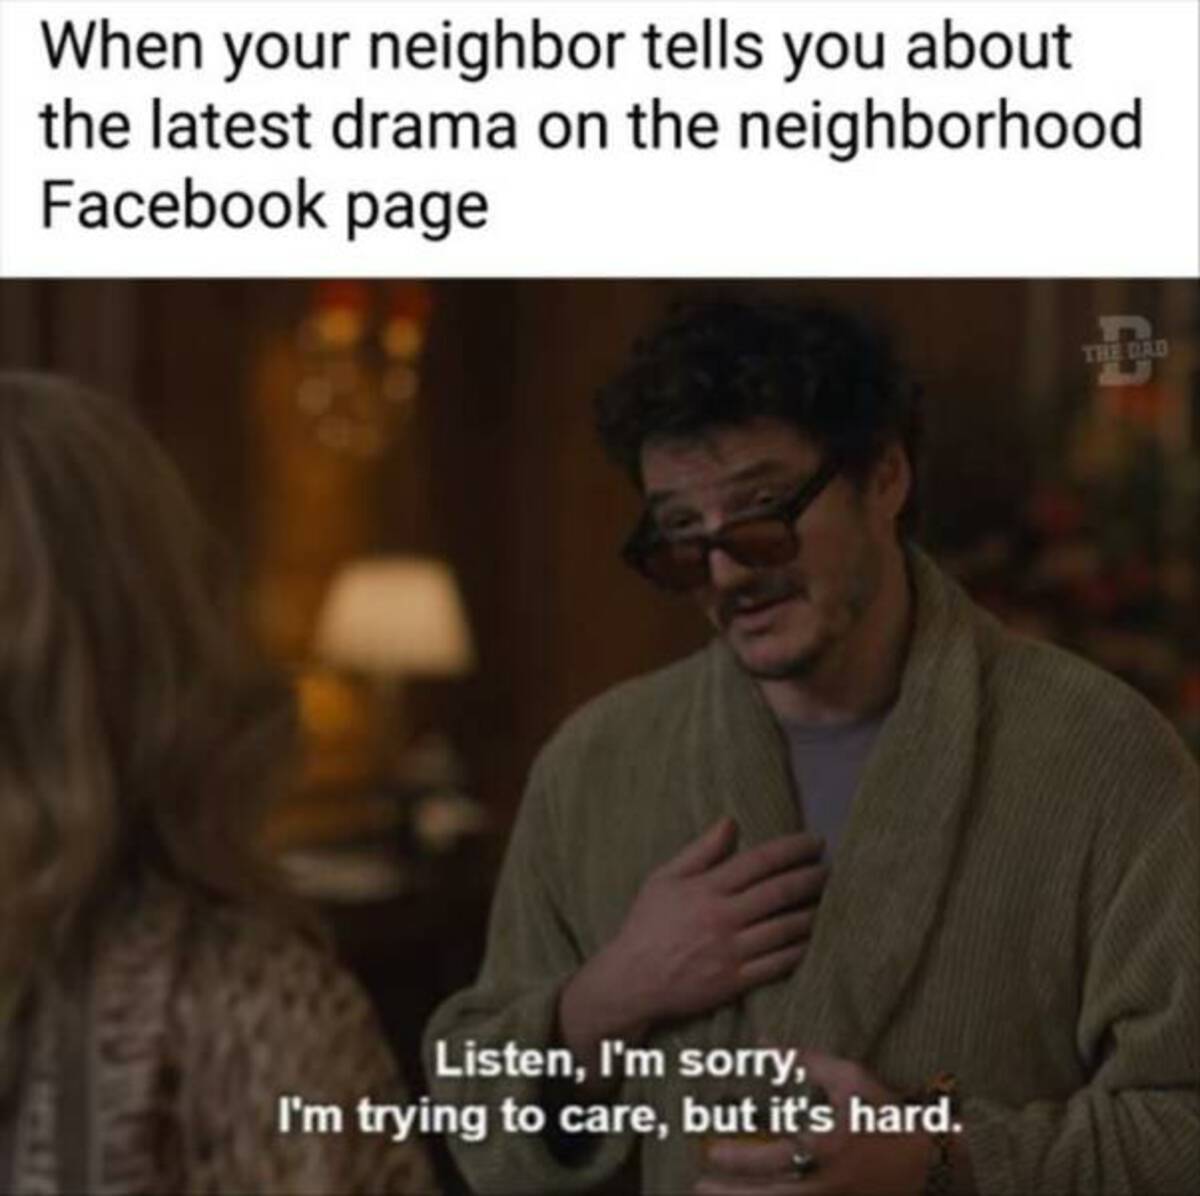 photo caption - When your neighbor tells you about the latest drama on the neighborhood Facebook page Listen, I'm sorry, I'm trying to care, but it's hard. The Dad